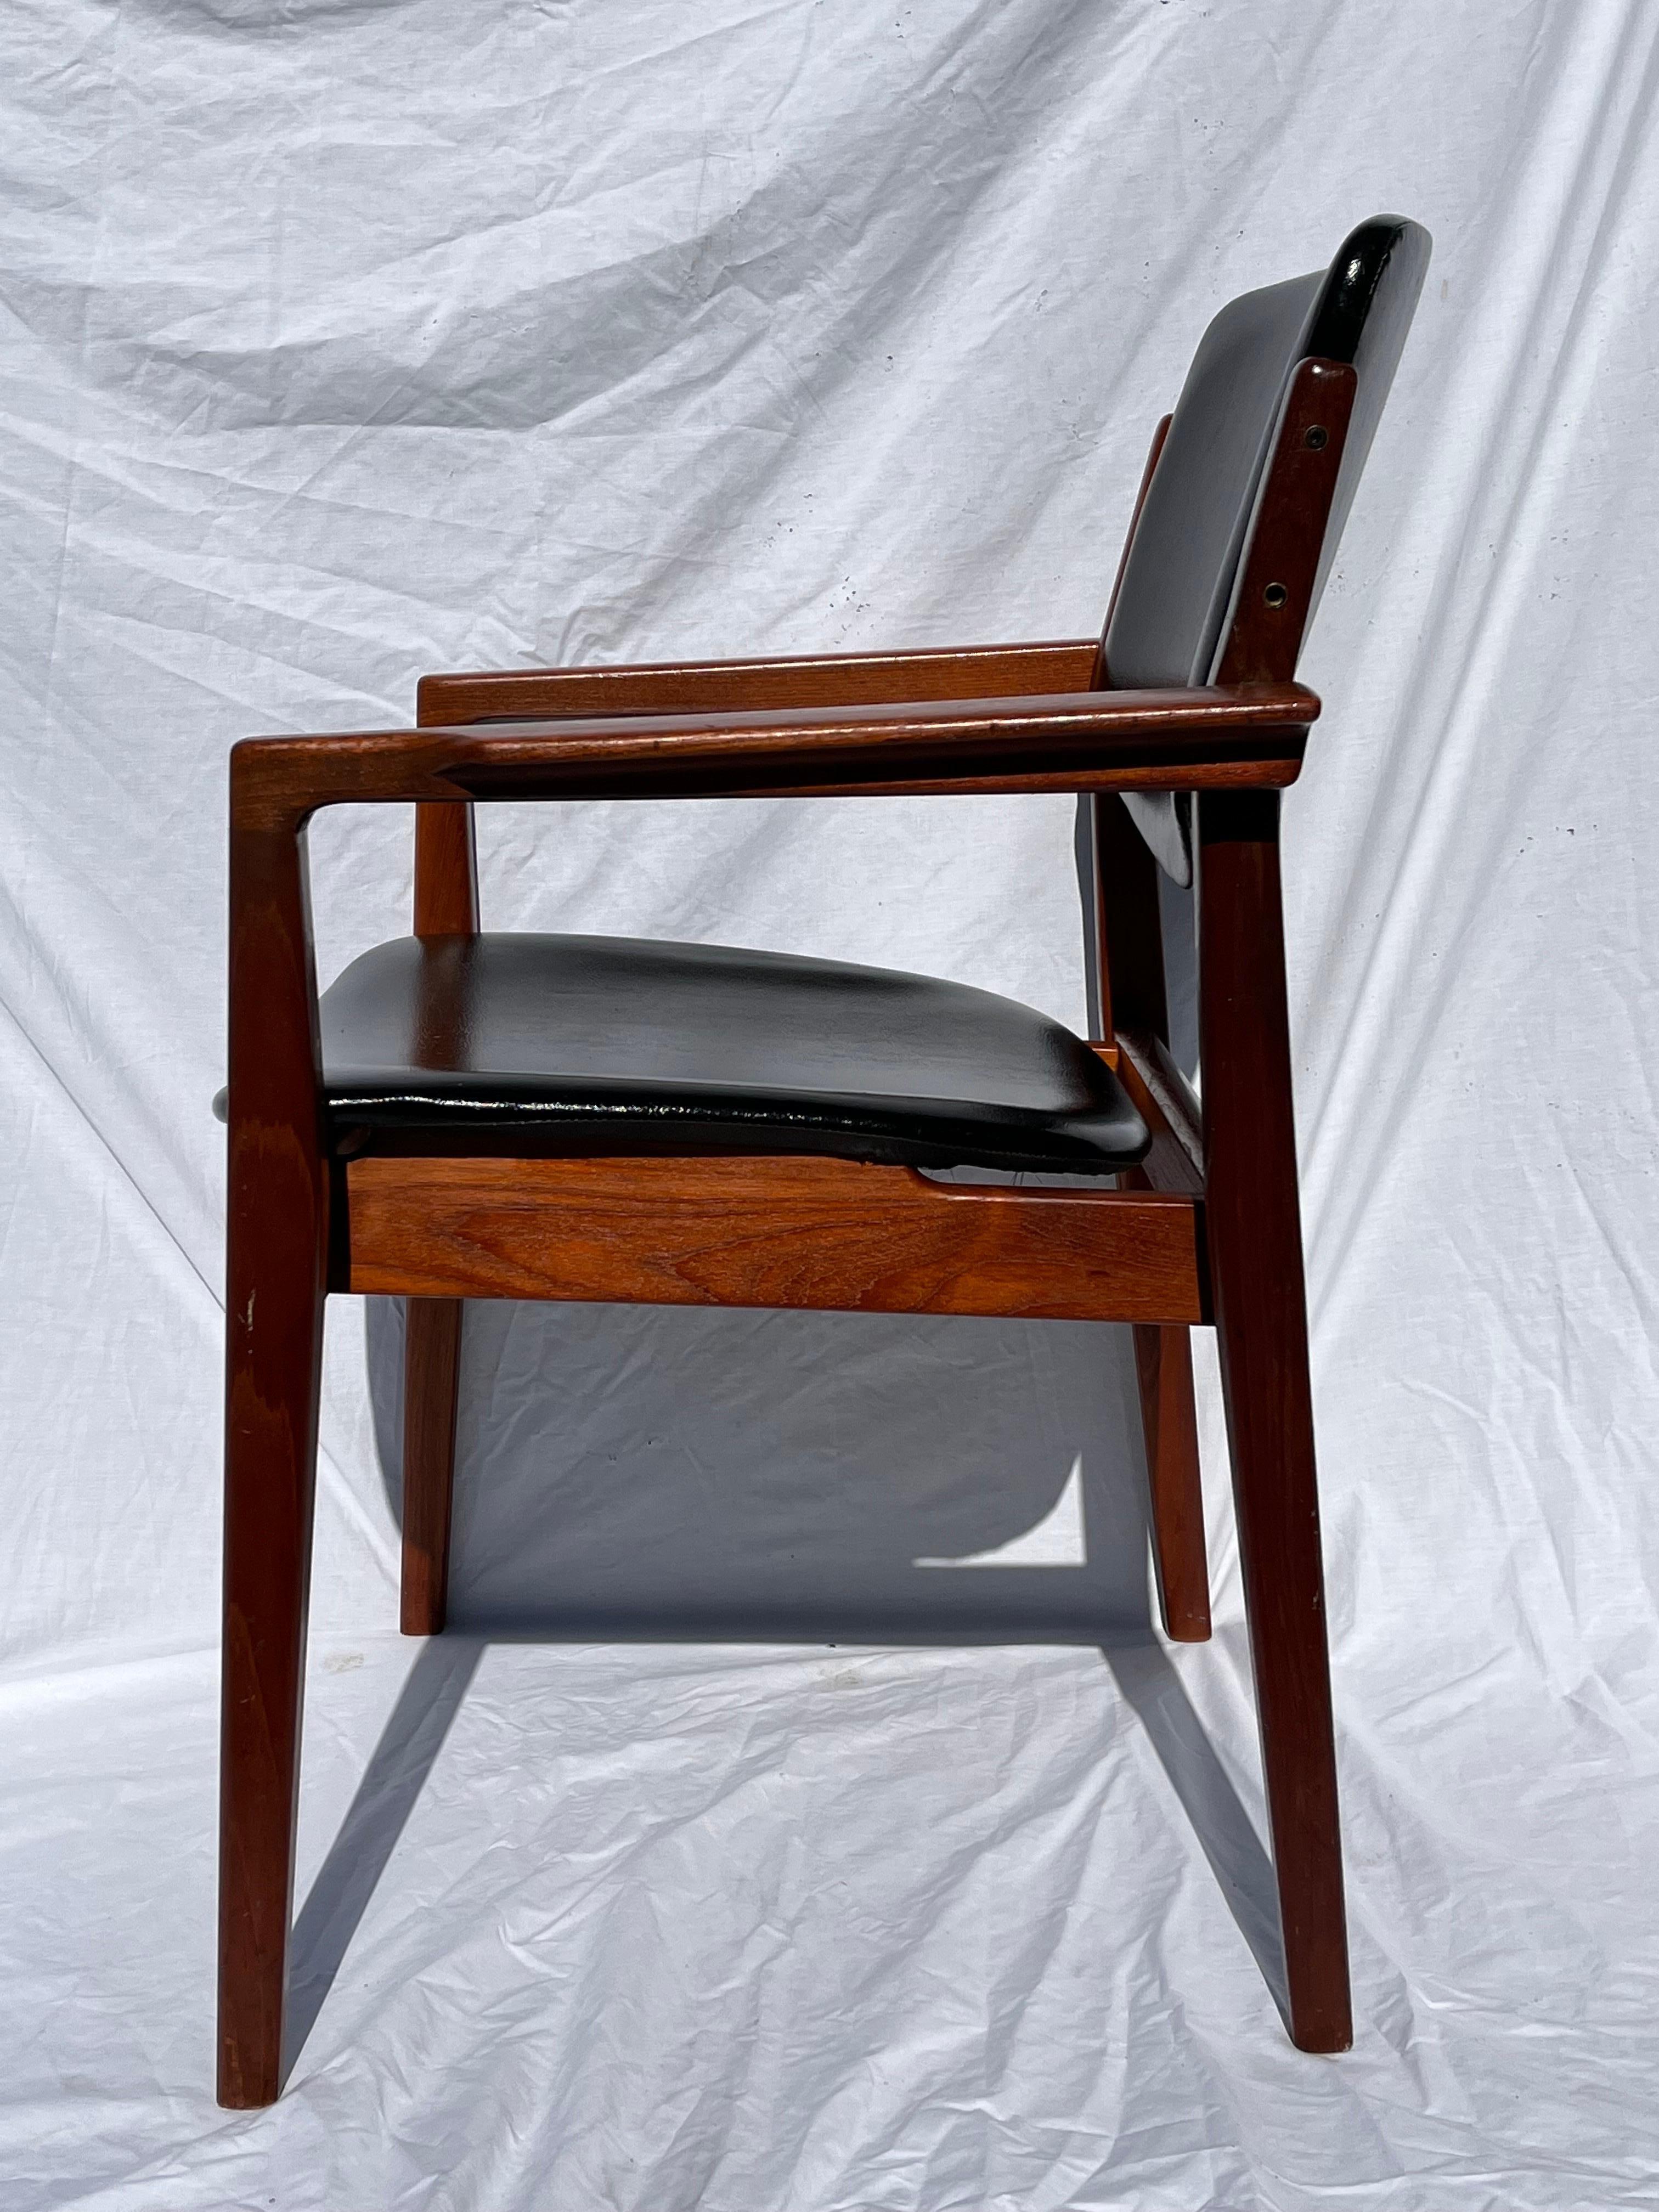 A vintage circa 1960s Danish Mid-Century Modern armchair designed by Finn Juhl for France and Son. This armchair is model 196. The original Danish company, France and Son has an important history - be wary of contemporary reproductions! Here's some